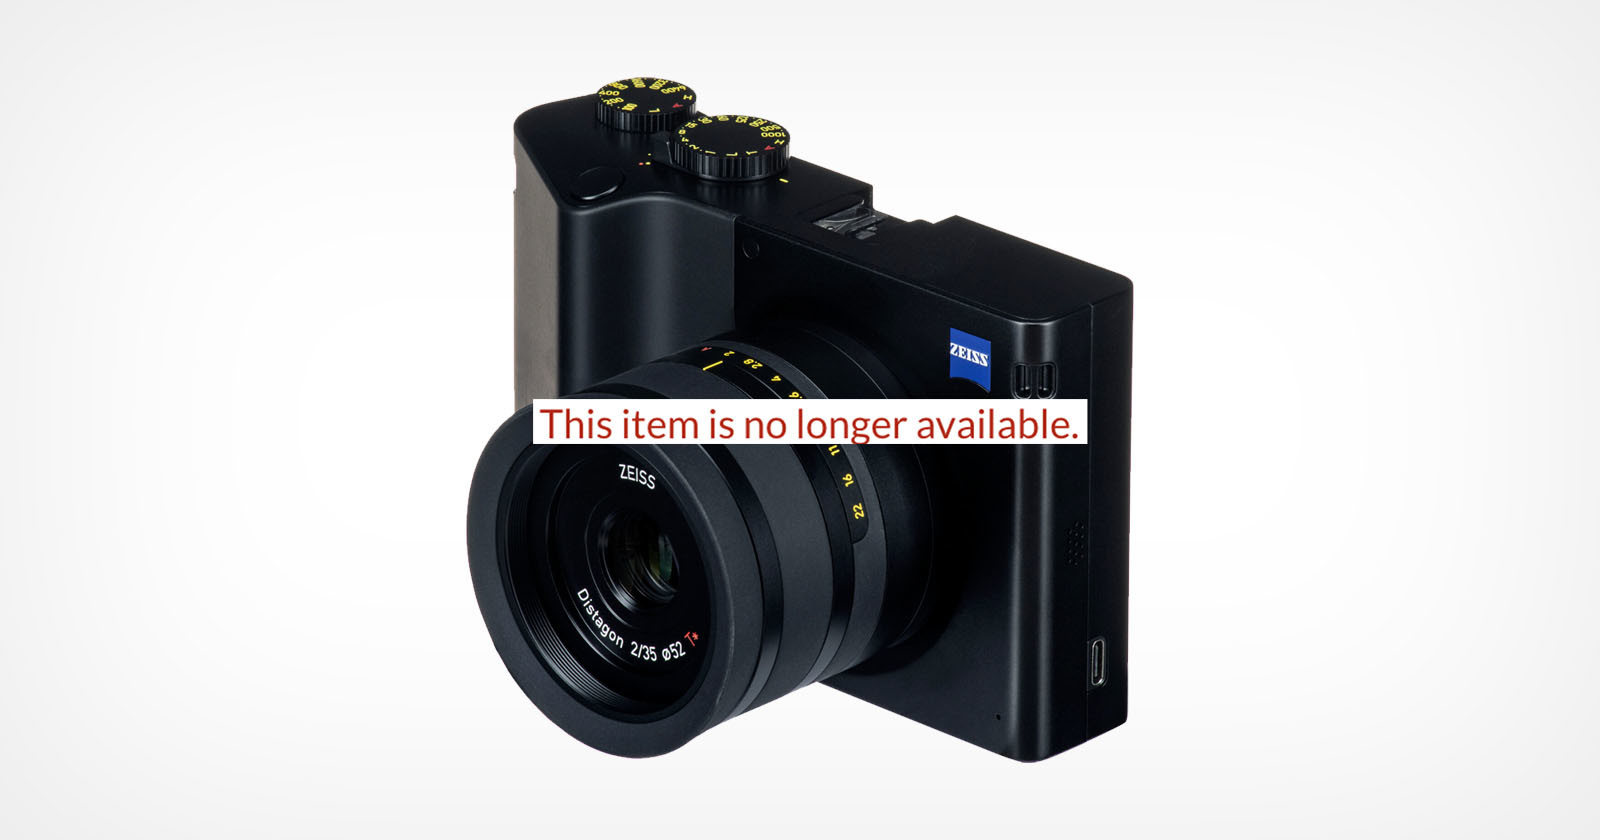 The Android-Powered Zeiss ZX1 Camera Has Been Discontinued